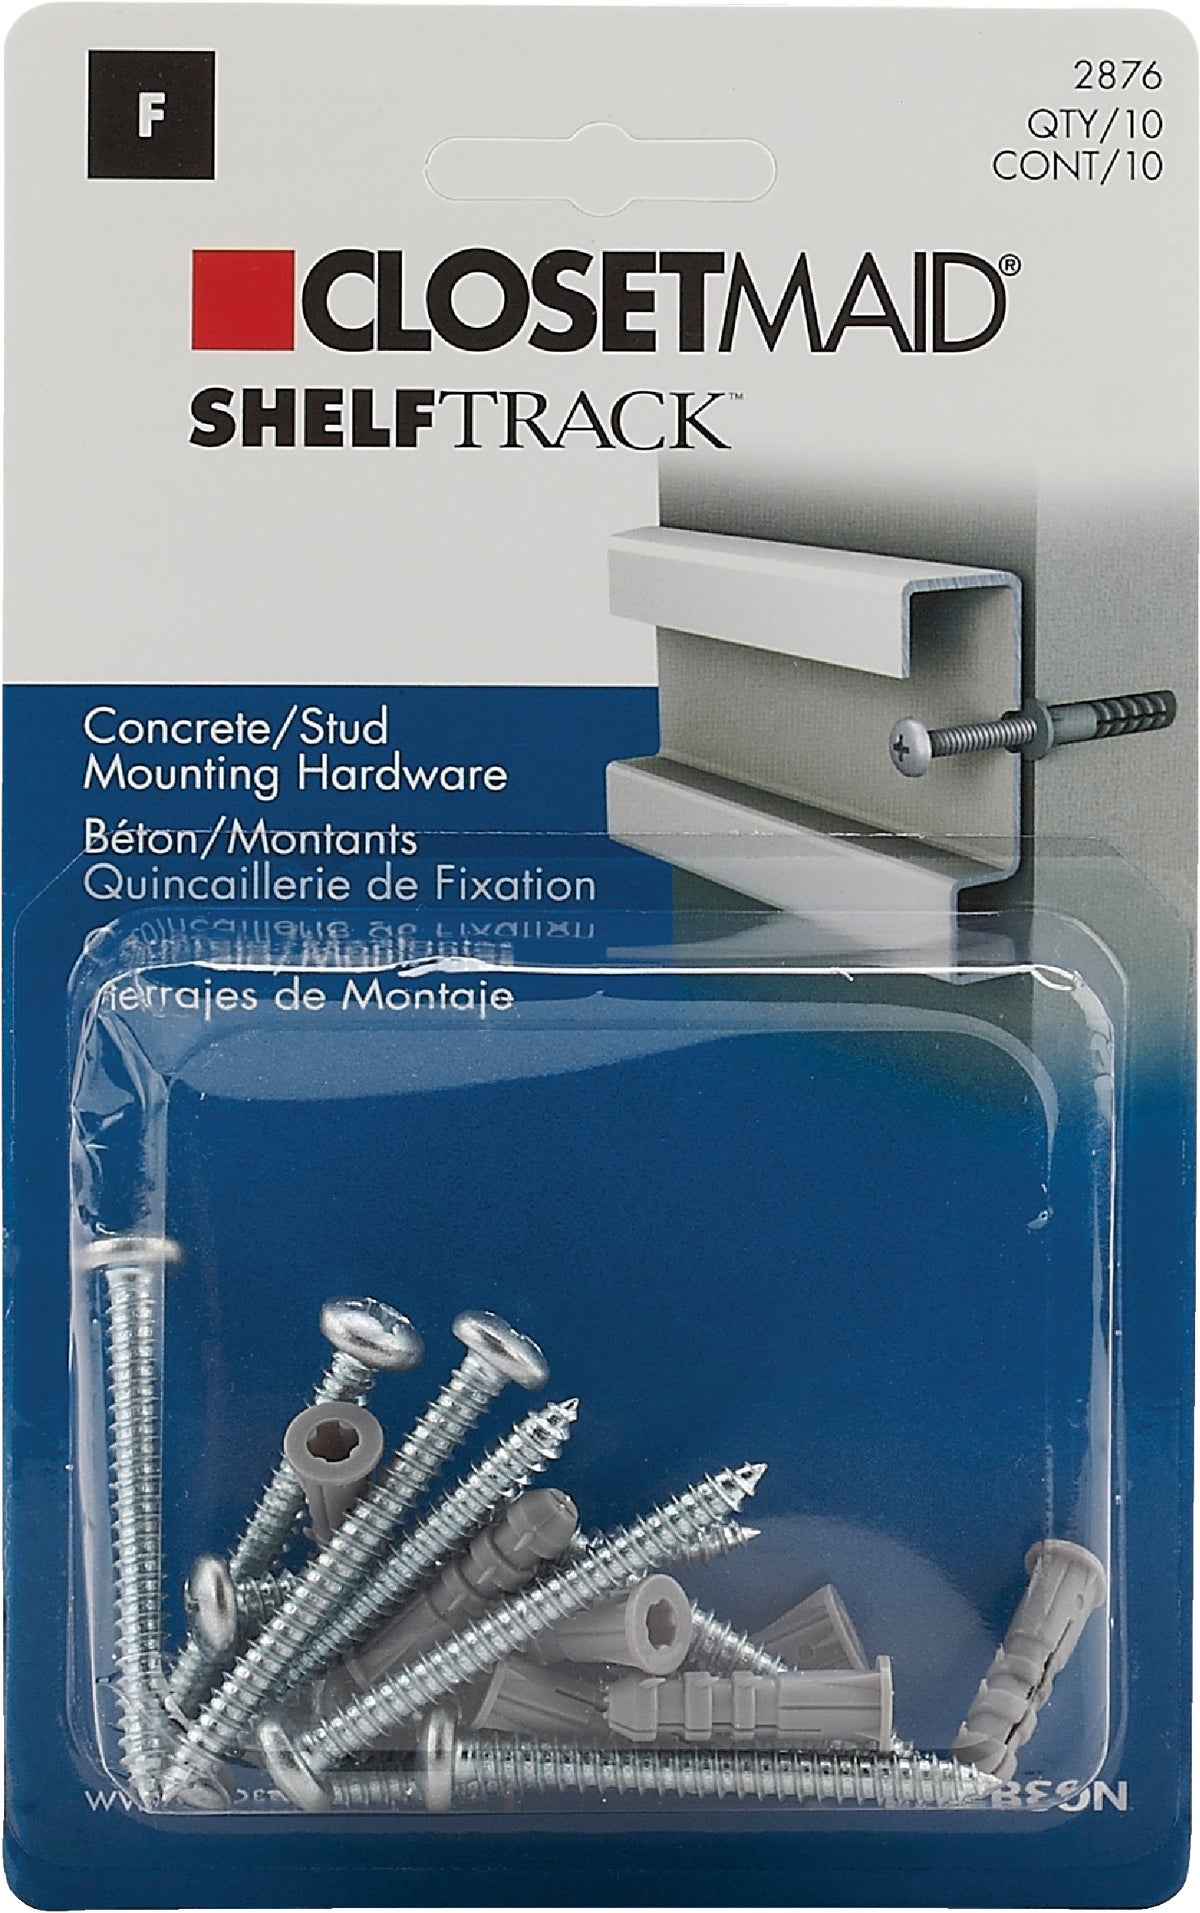 ClosetMaid Wall Anchor Concrete Stud Mounting Hardware for ShelfTrack System 